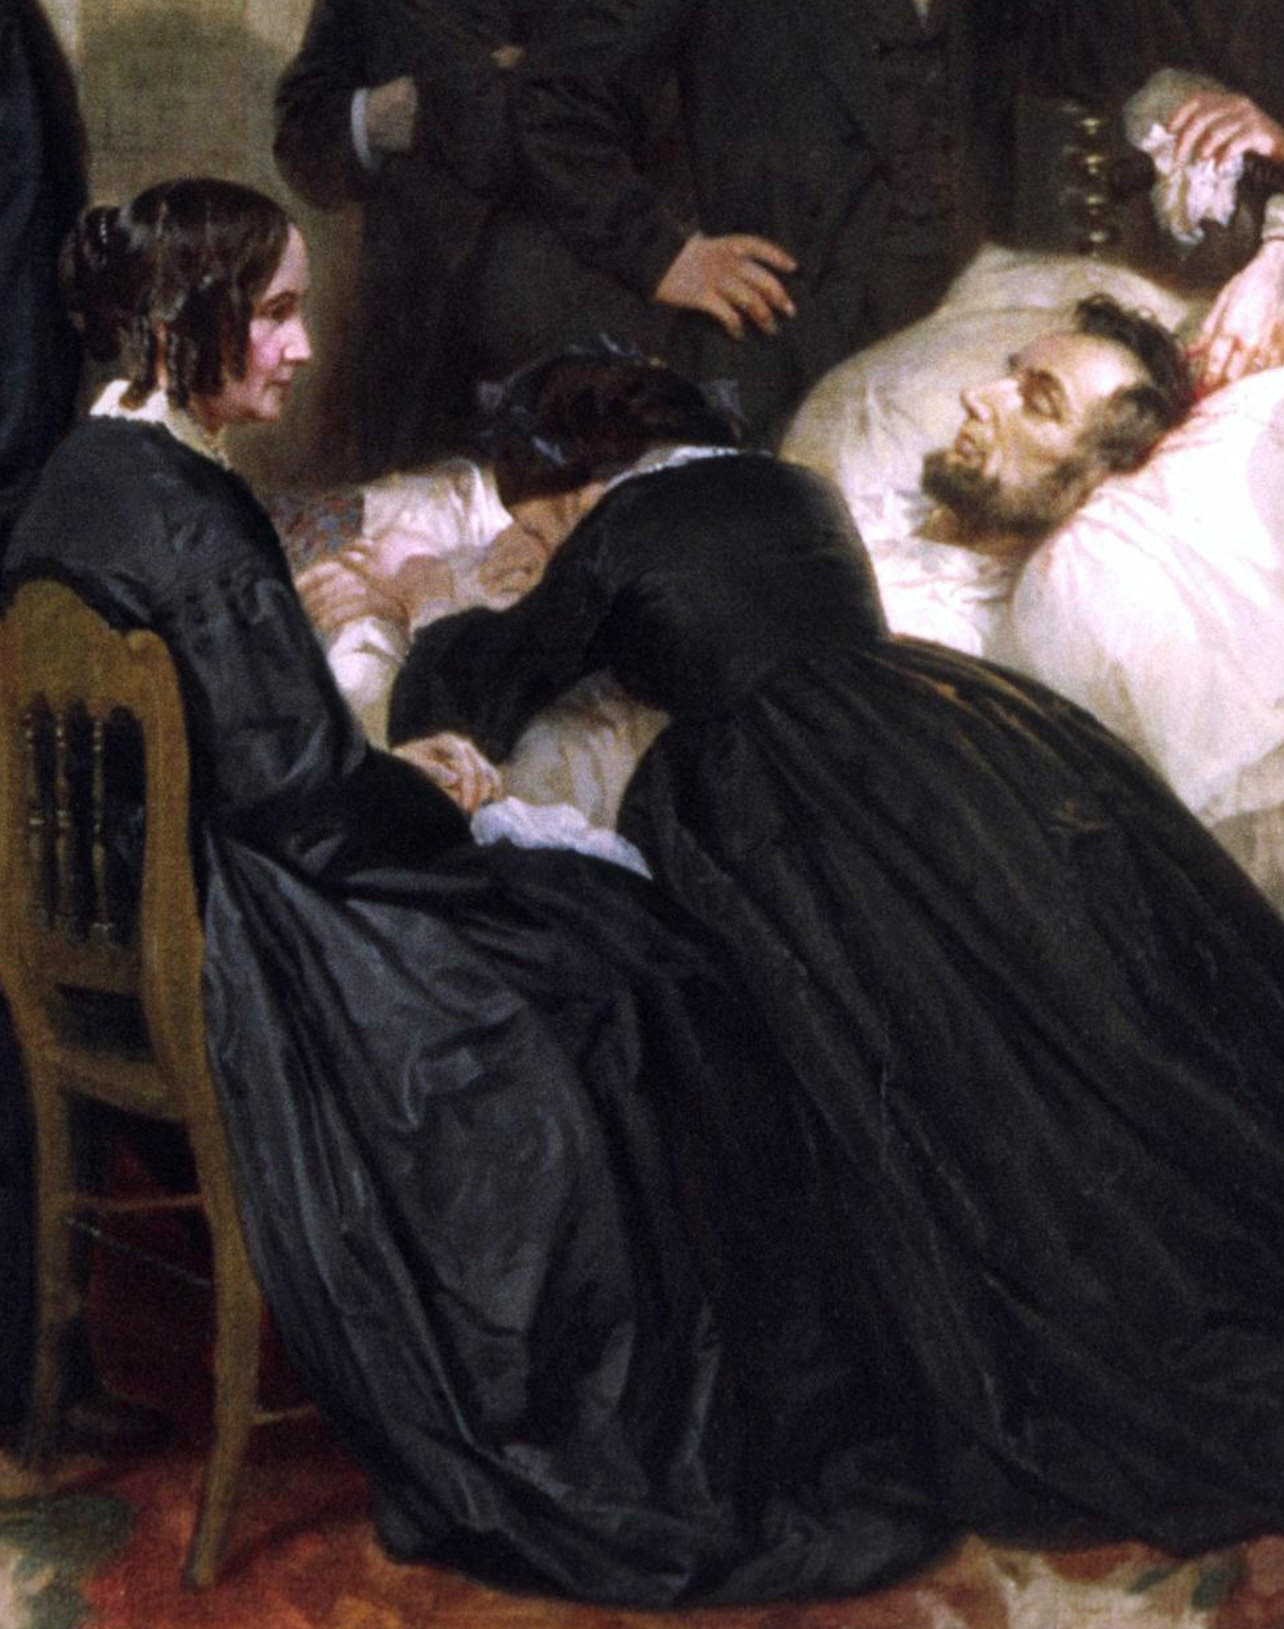 The Last Hours of Abraham Lincoln by Alonzo Chappel, 1868